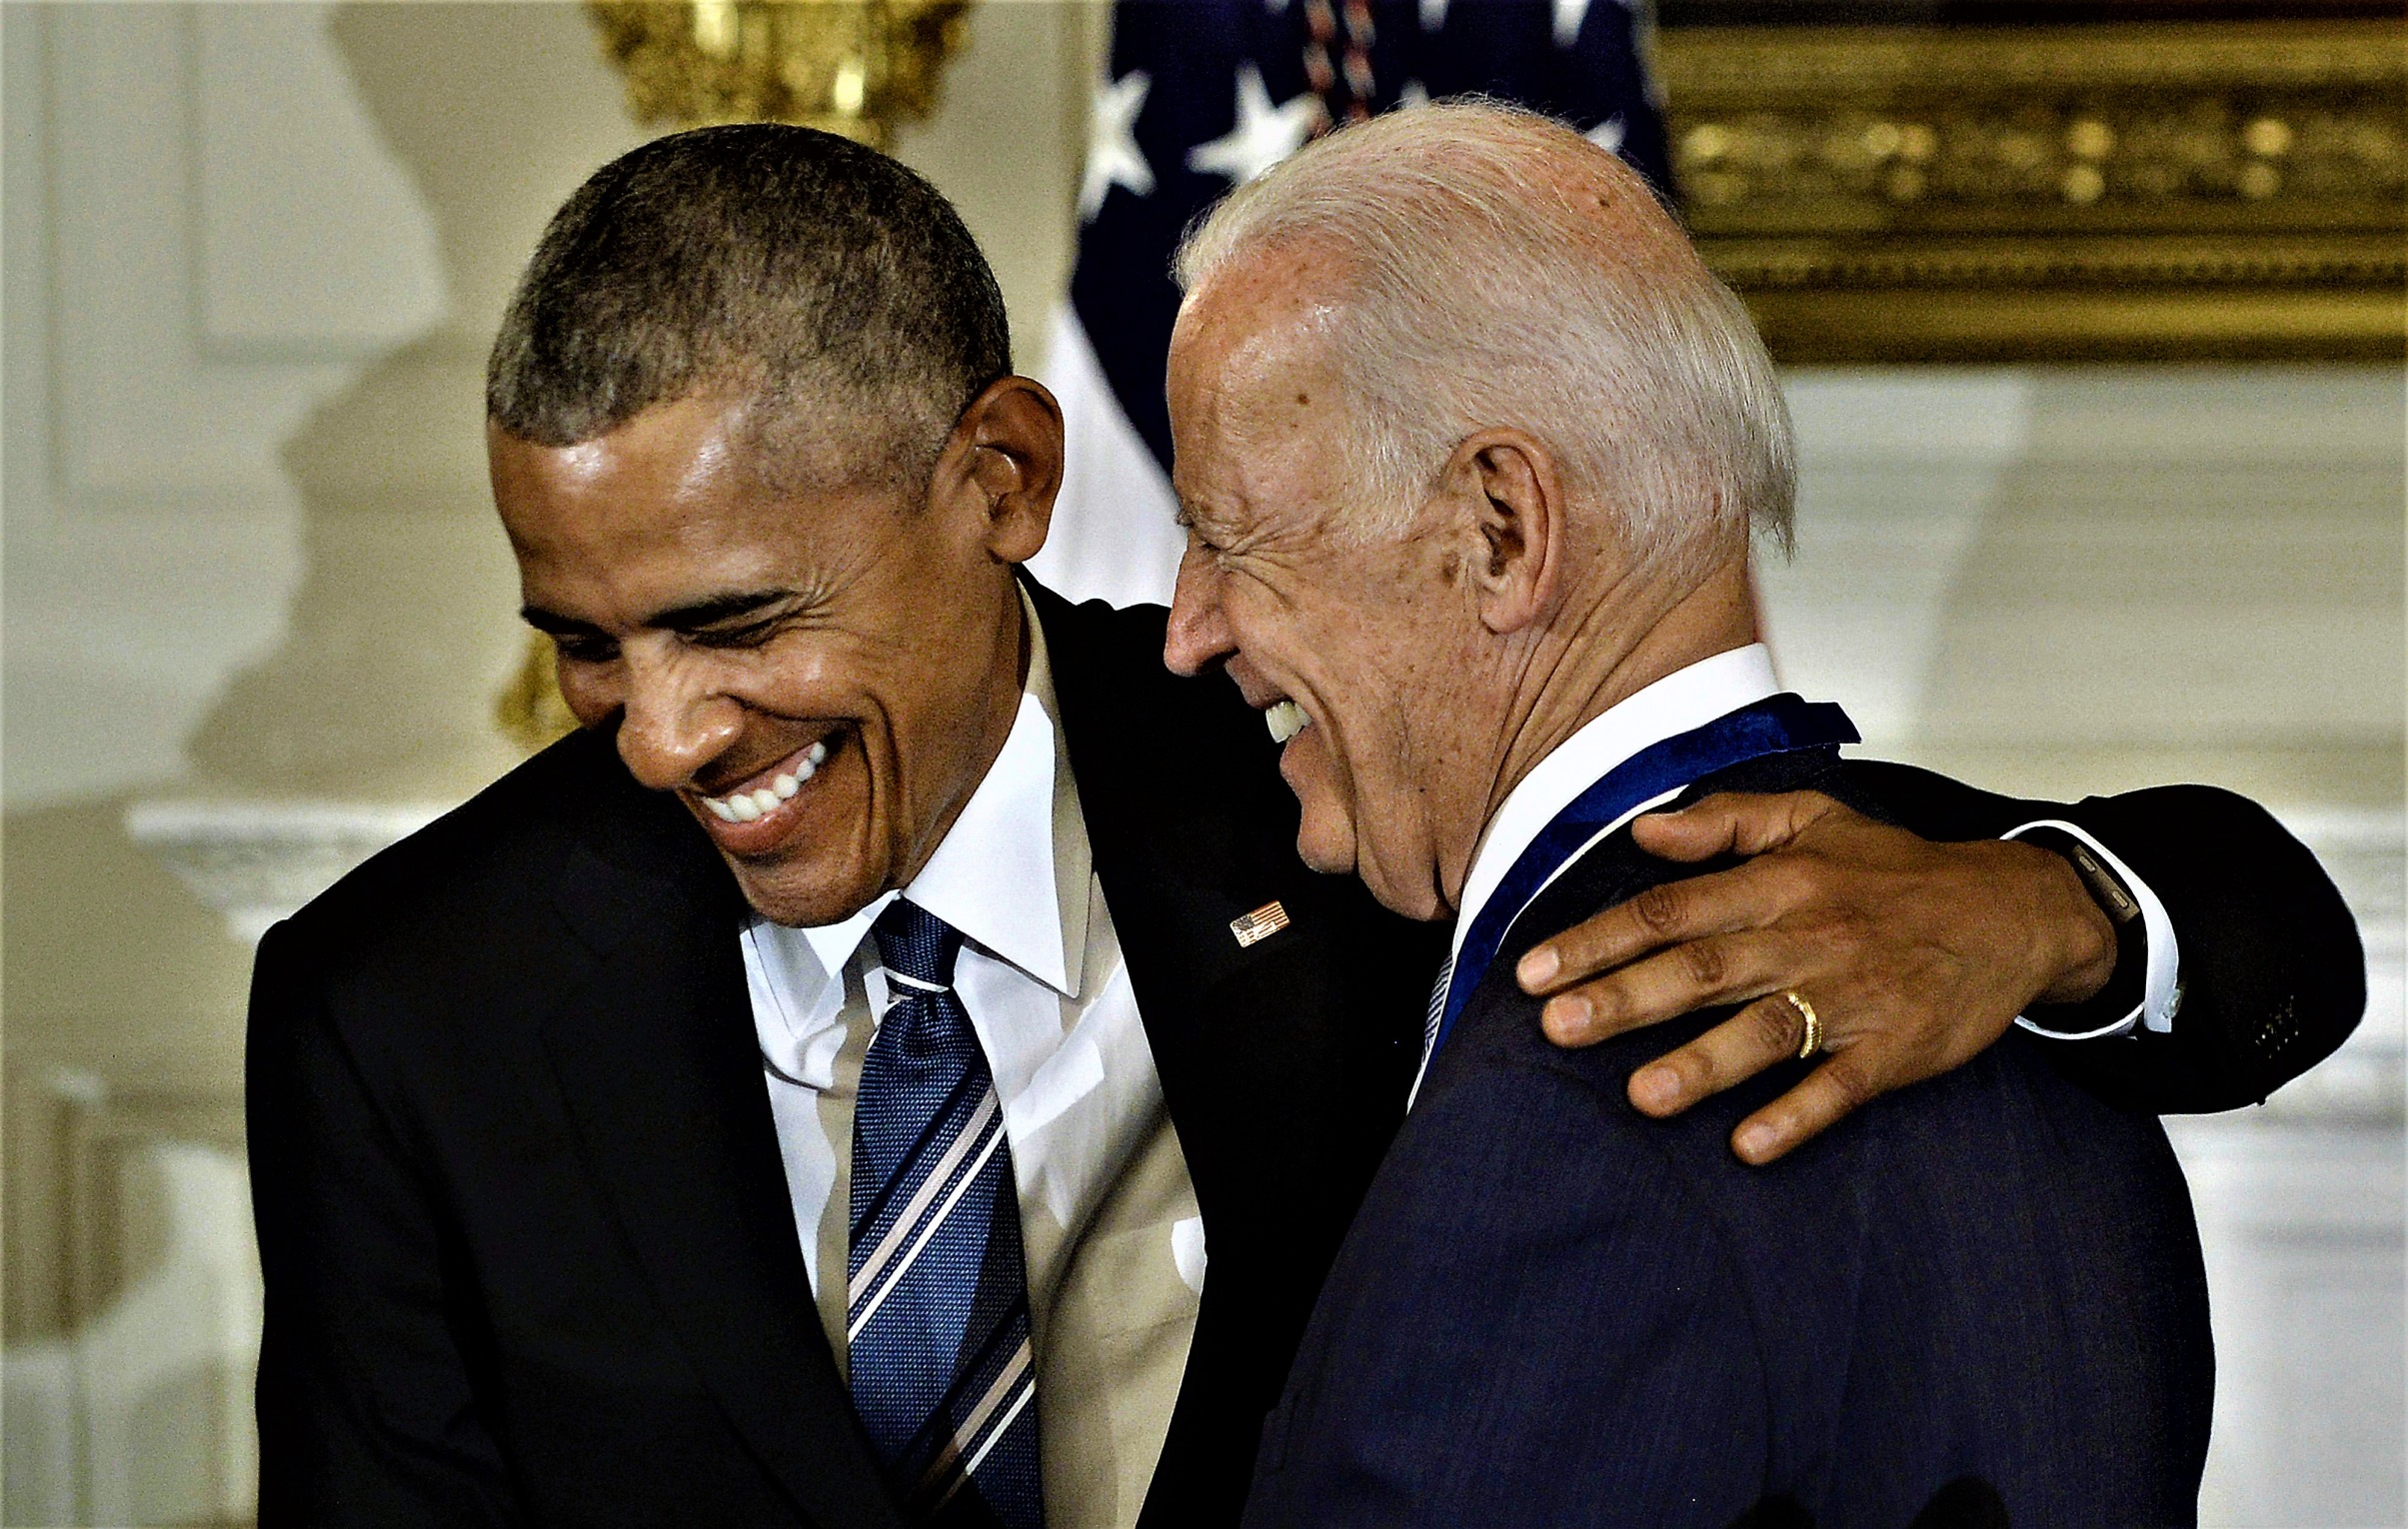 Obama and Biden laughing No 1 Blank Meme Template